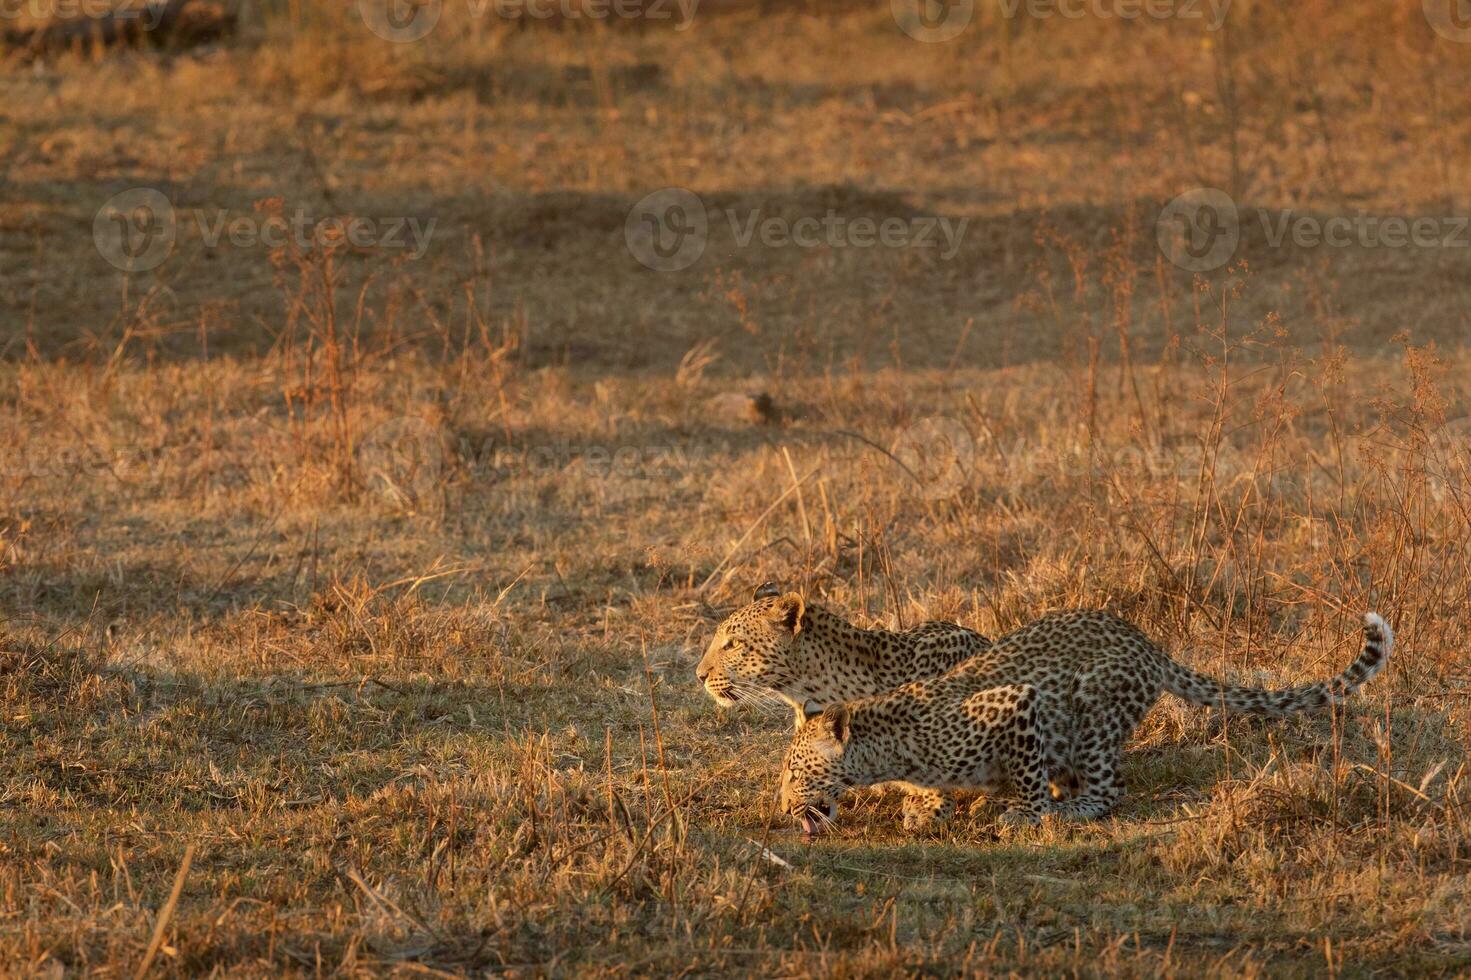 A leopard and her cub in the Okavango Delta. photo